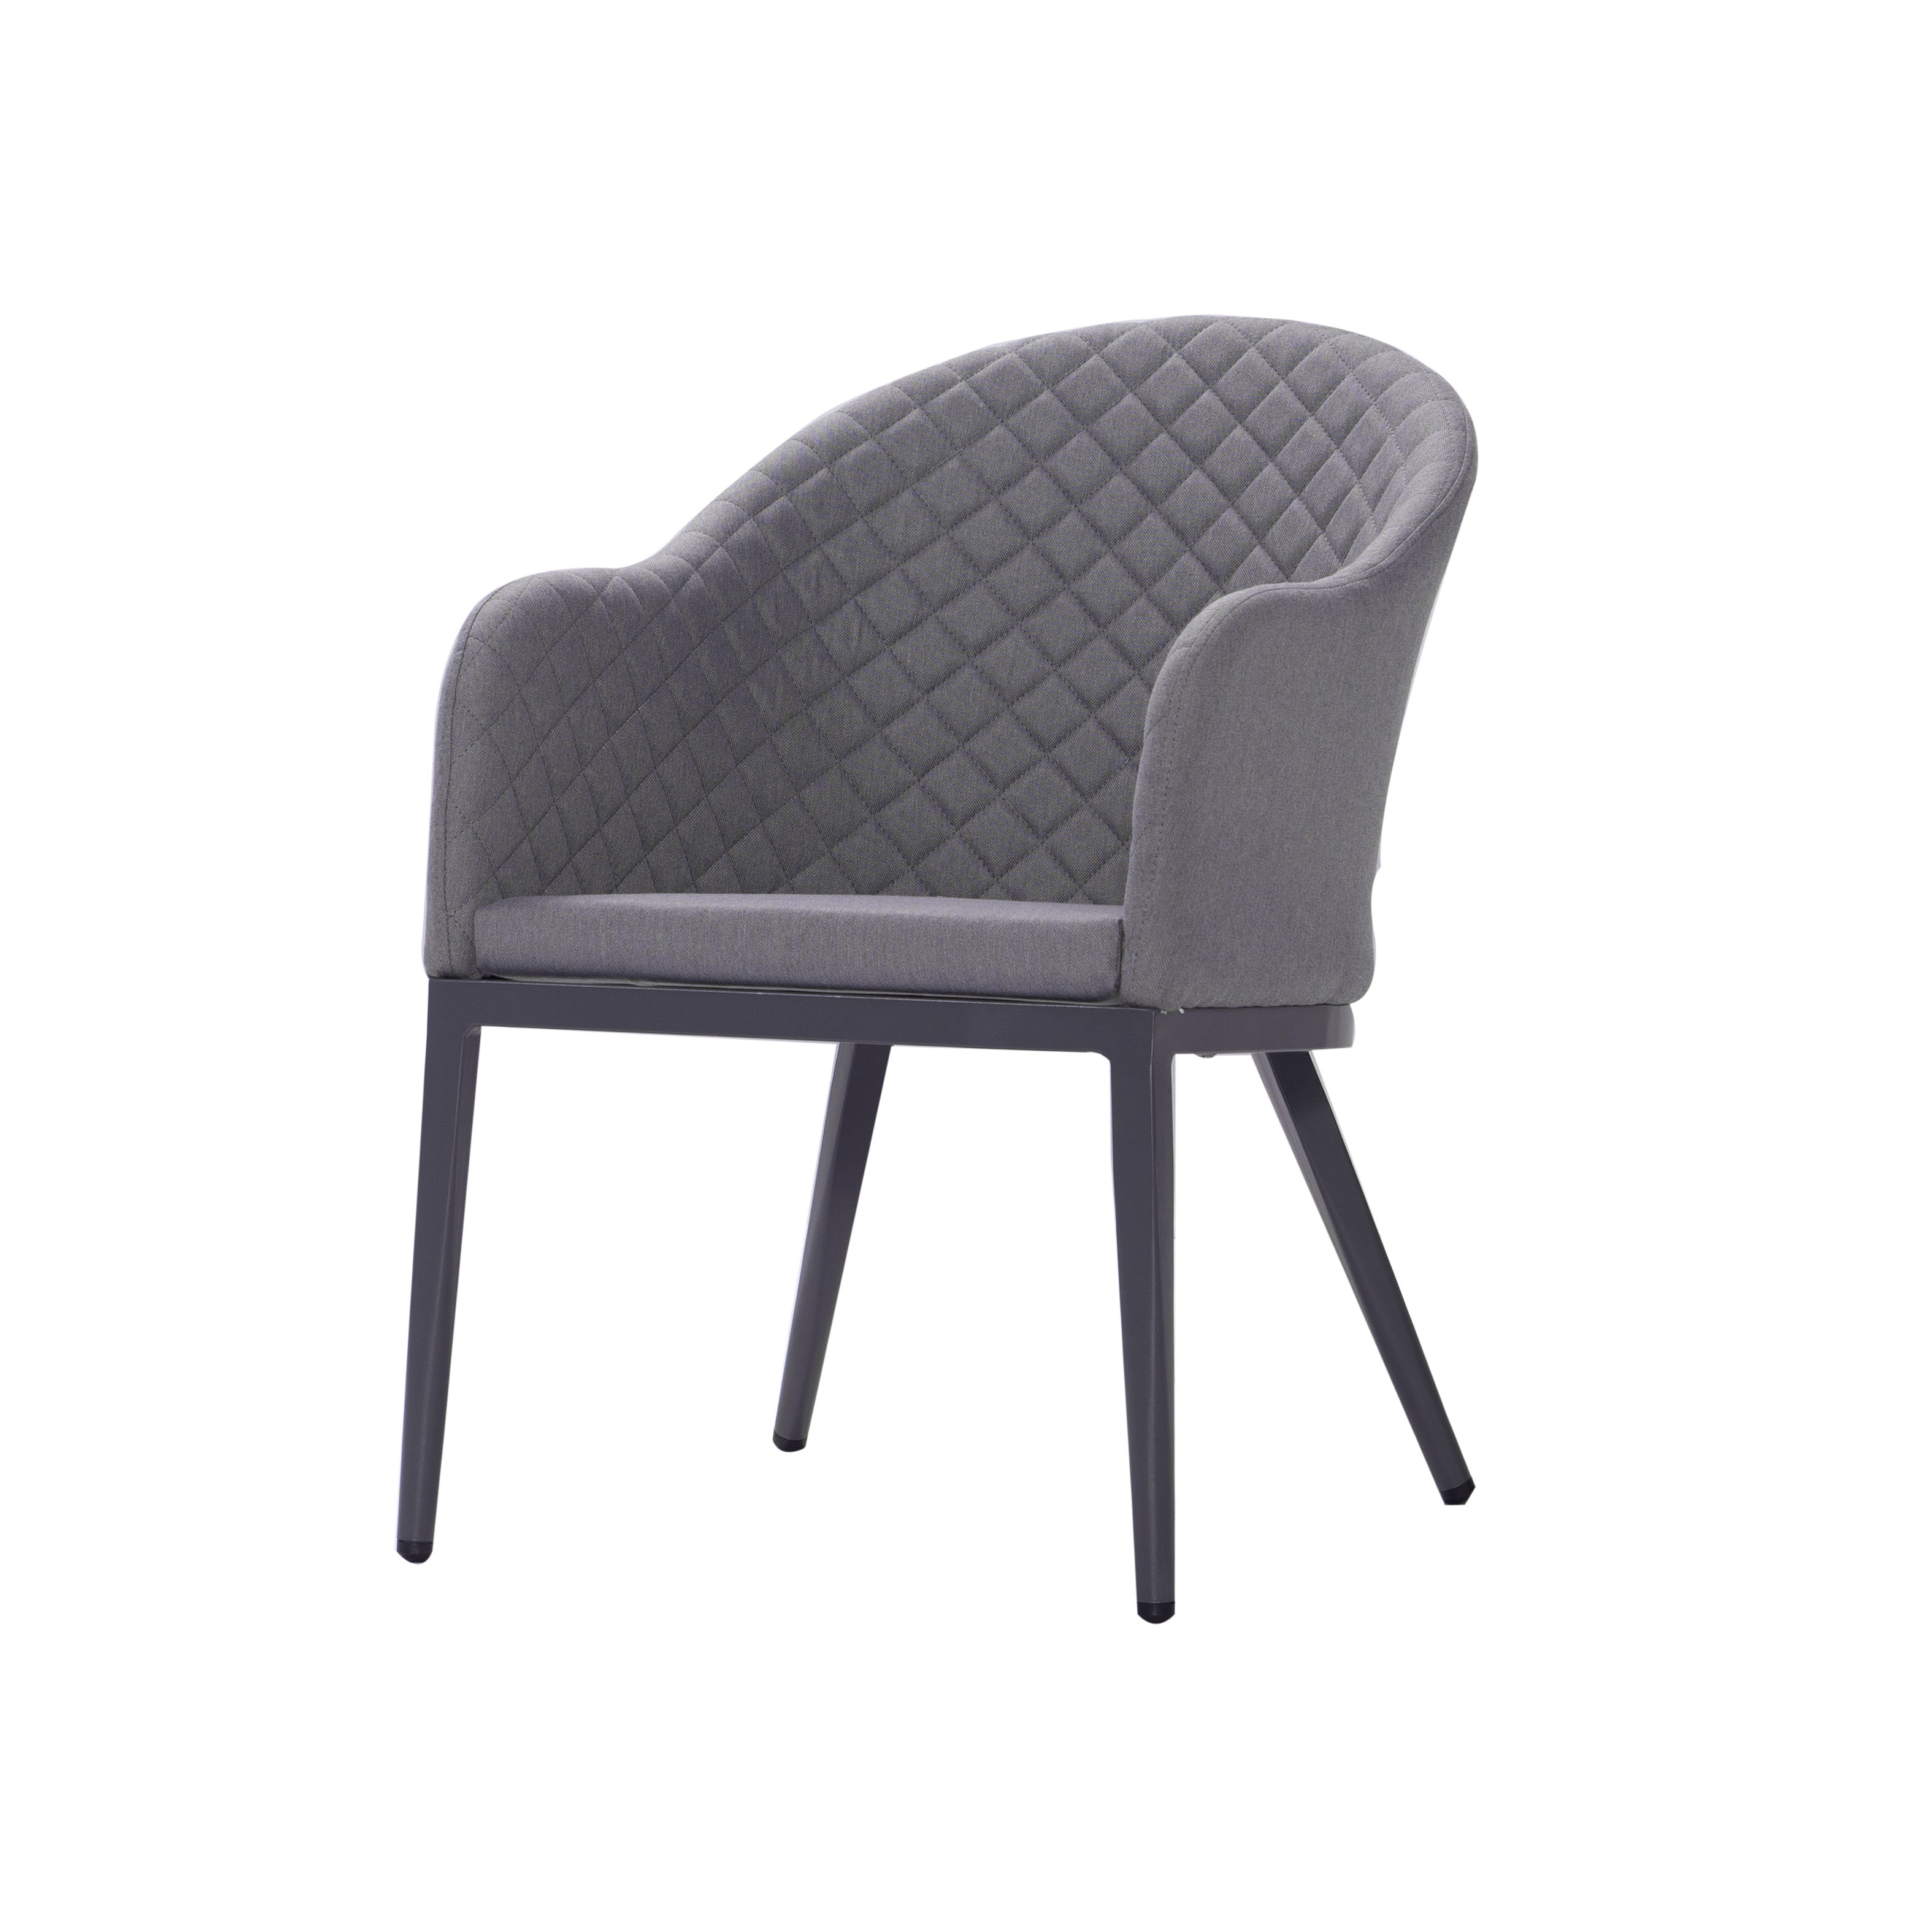 Legend dining chair S1